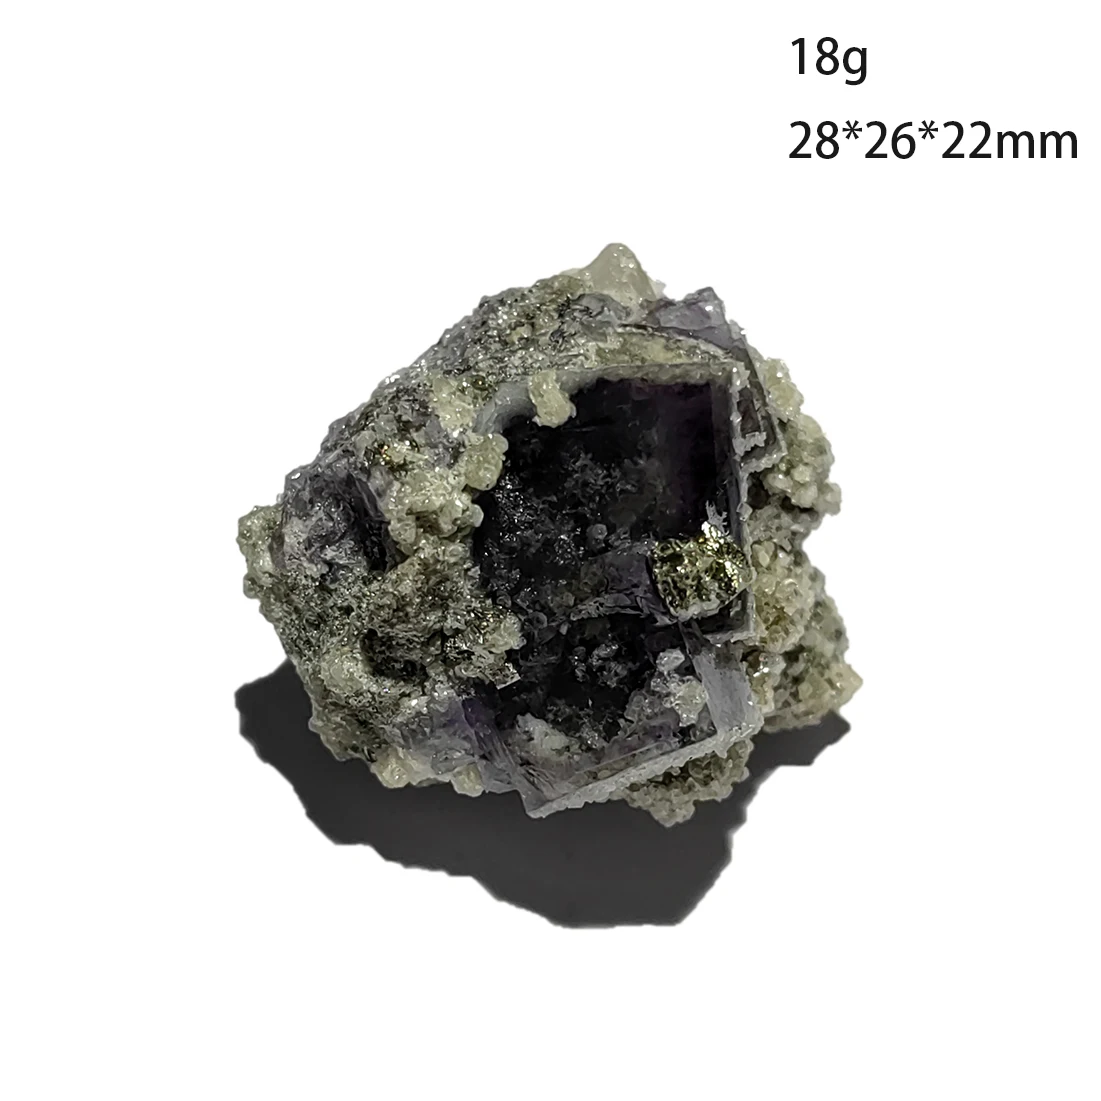 

C5-9B Natural Fluorite Mica Pyrite Mineral Crystal Specimen From Yaogangxian Hunan Province China